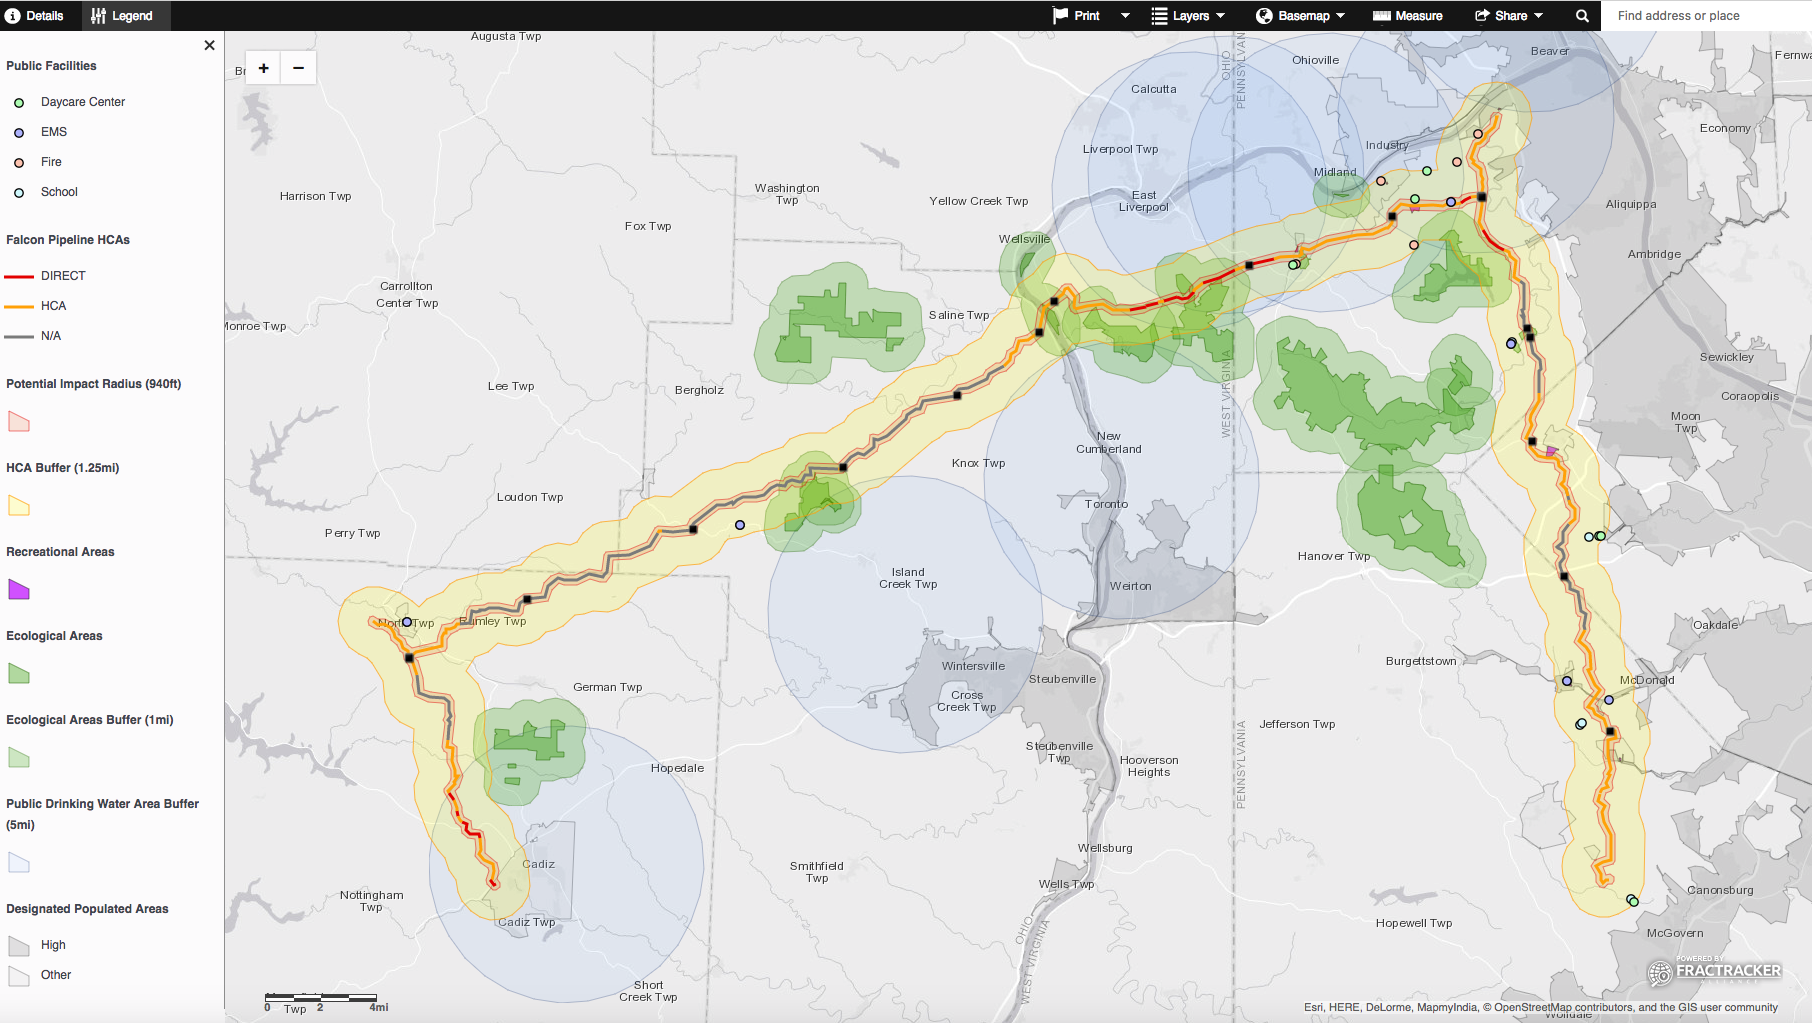 FracTracker interactive map showing Falcon pipeline path and high consequence areas around it